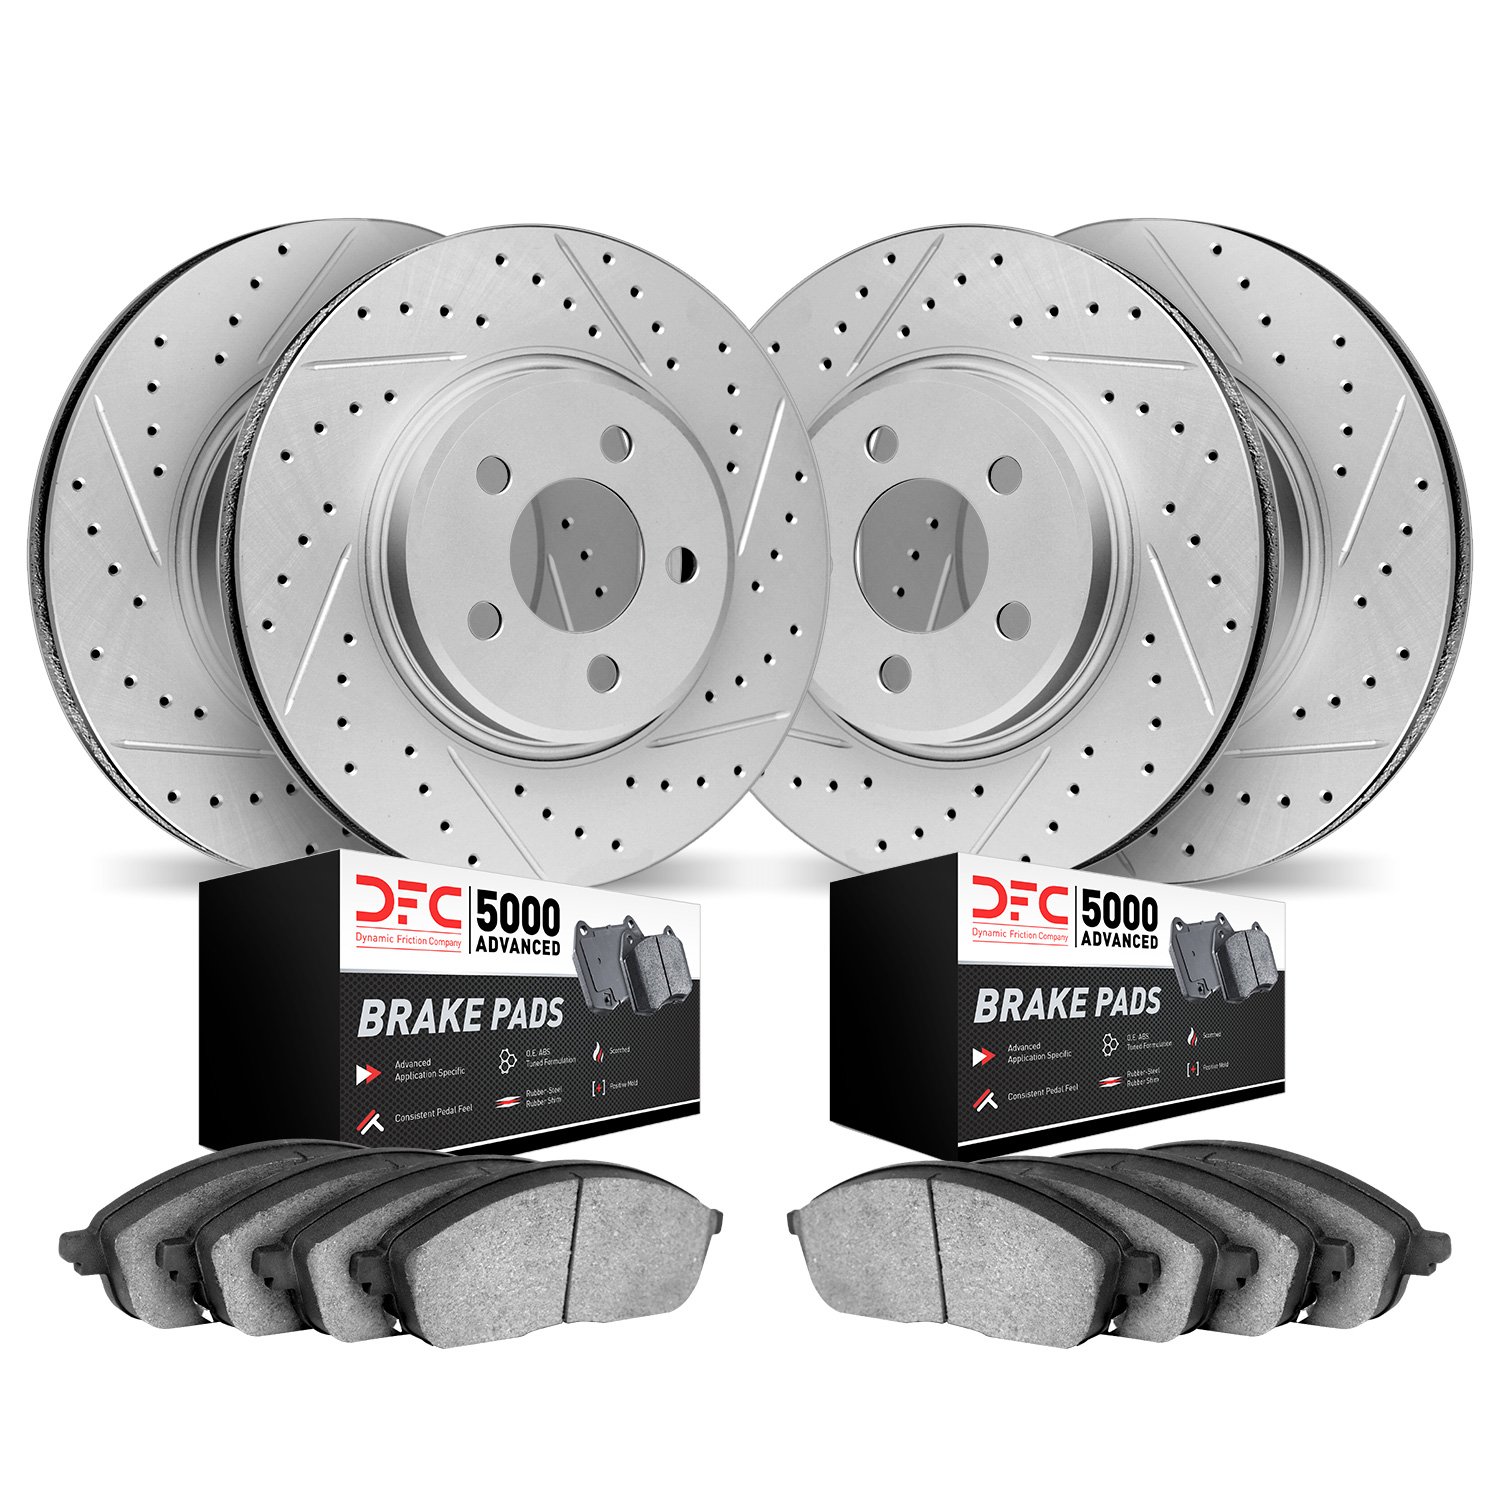 2504-54317 Geoperformance Drilled/Slotted Rotors w/5000 Advanced Brake Pads Kit, Fits Select Ford/Lincoln/Mercury/Mazda, Positio